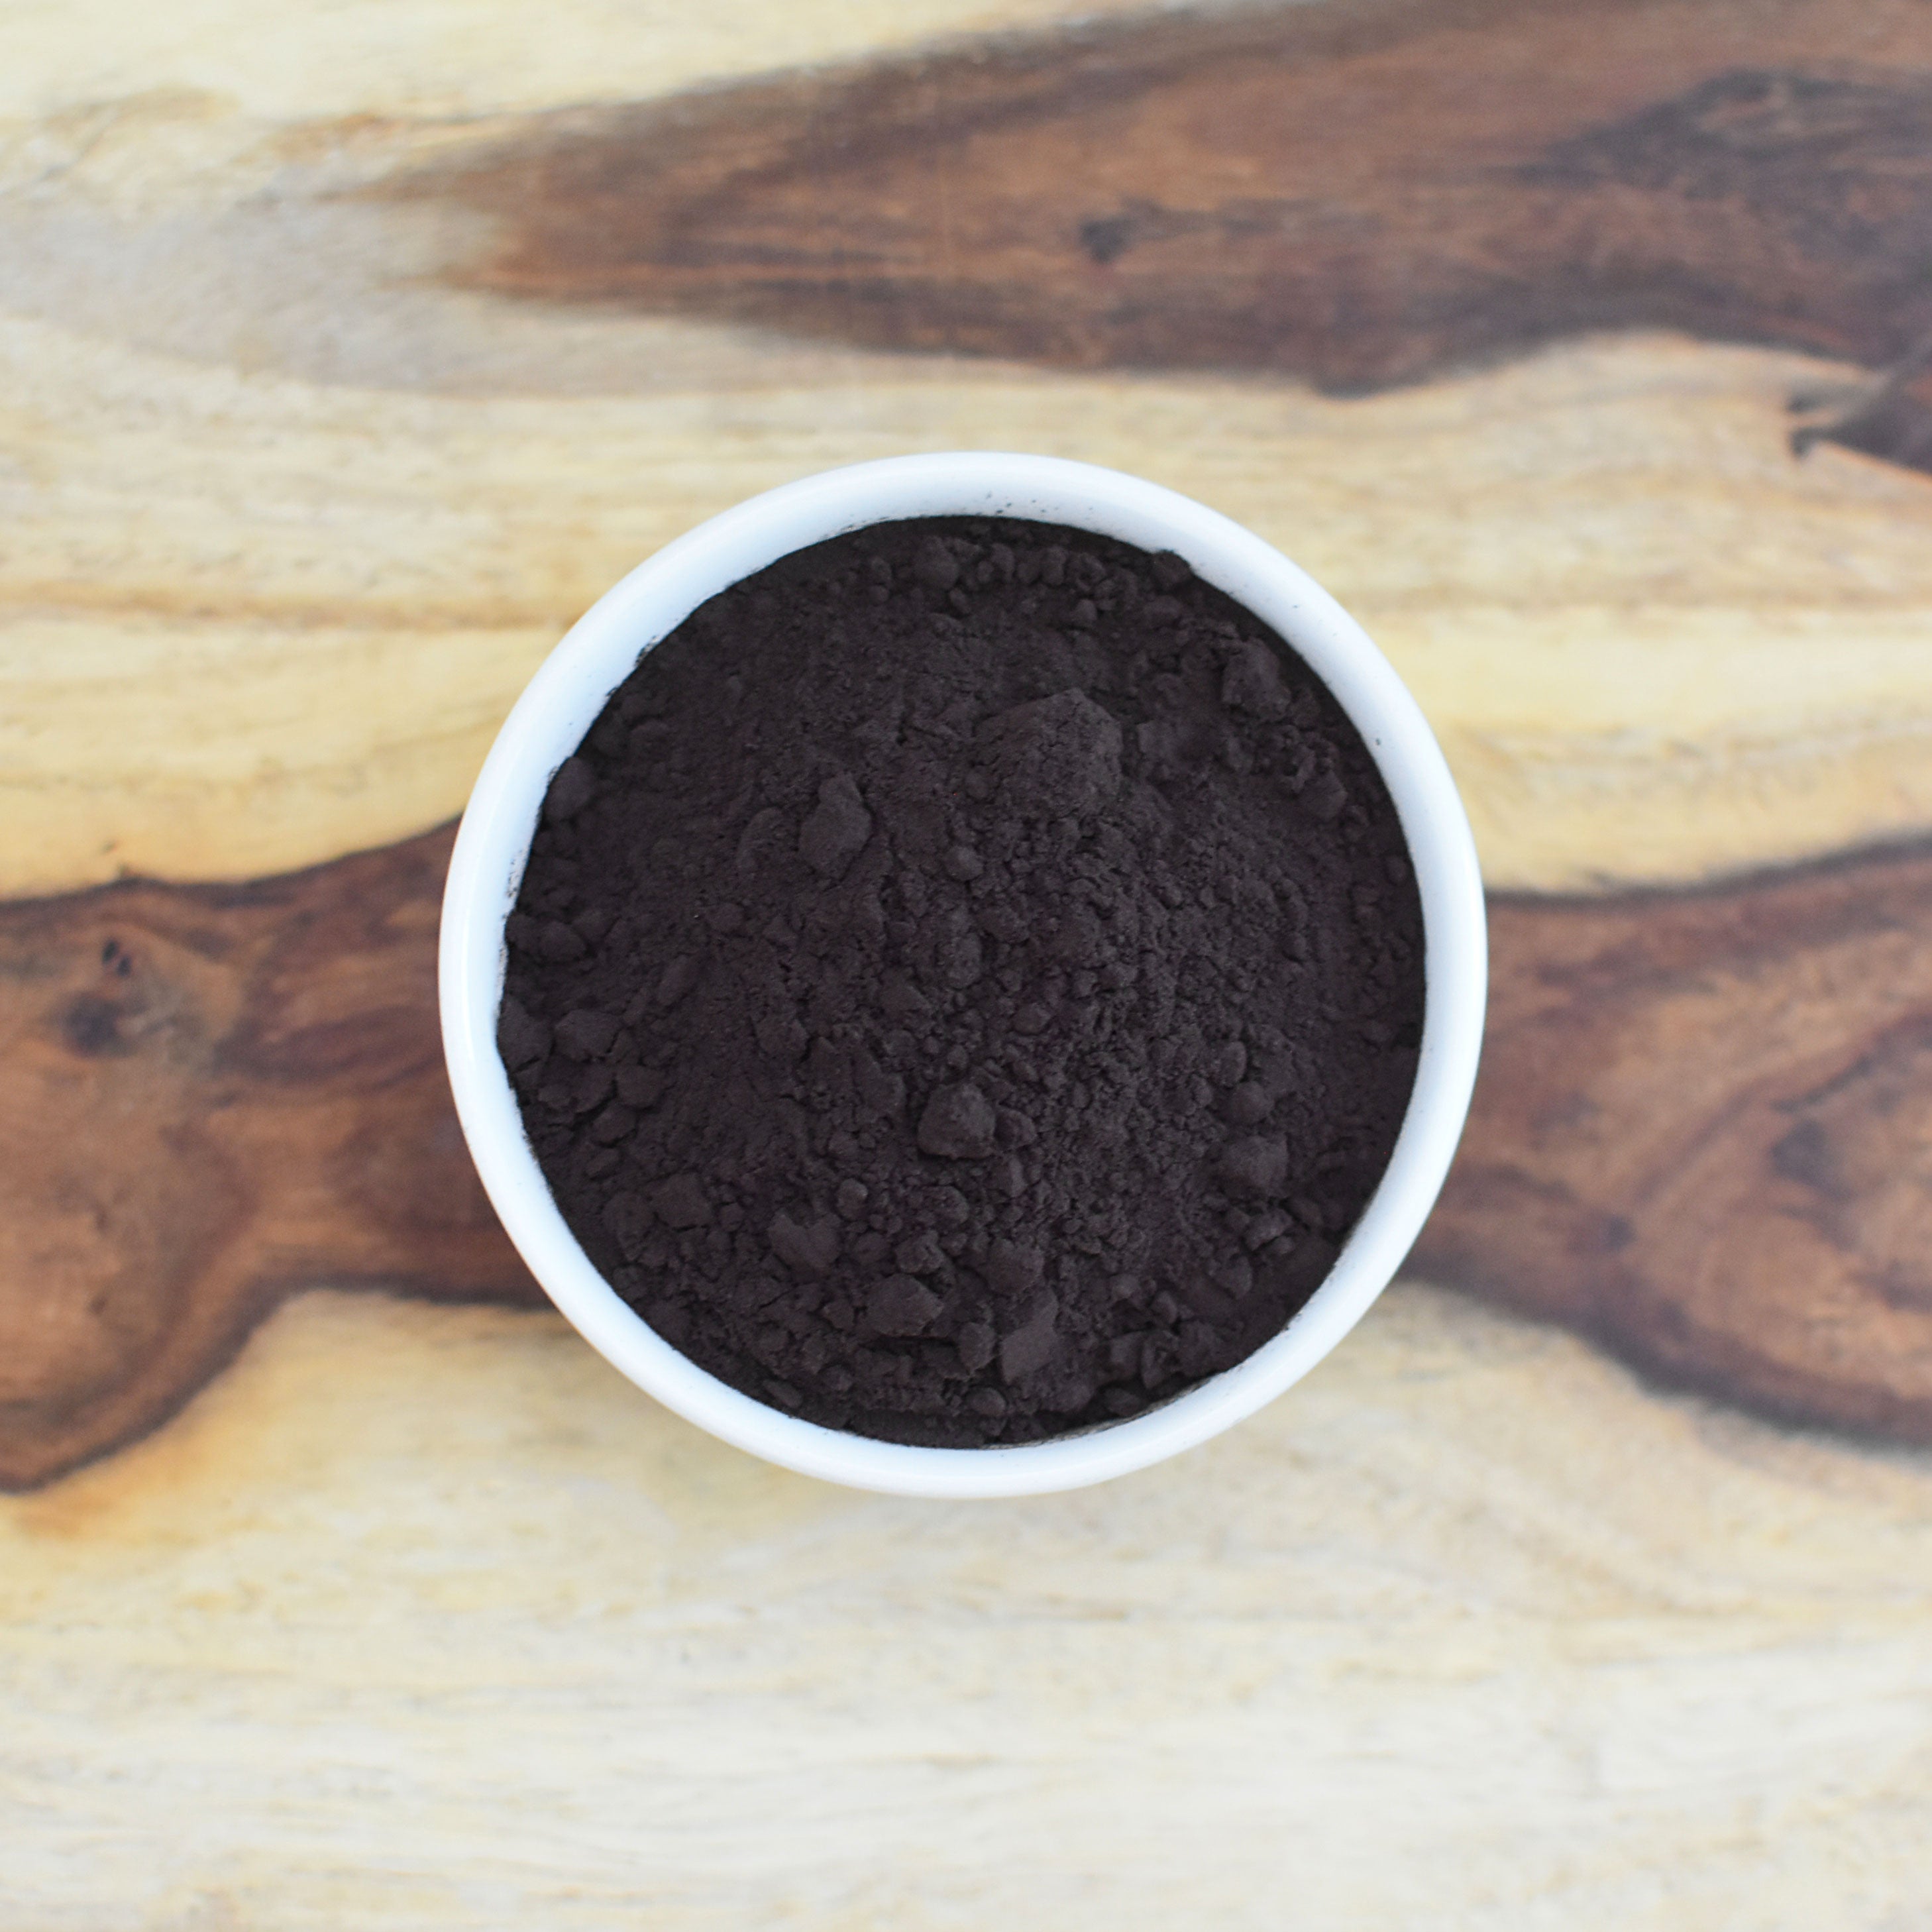 Eat Well Black Cocoa Powder 16 oz, Dutch-Processed Dark Cocoa Powder For  Making Chocolate and Baking, Unsweetened Alkalized Dark Cocoa Powder in